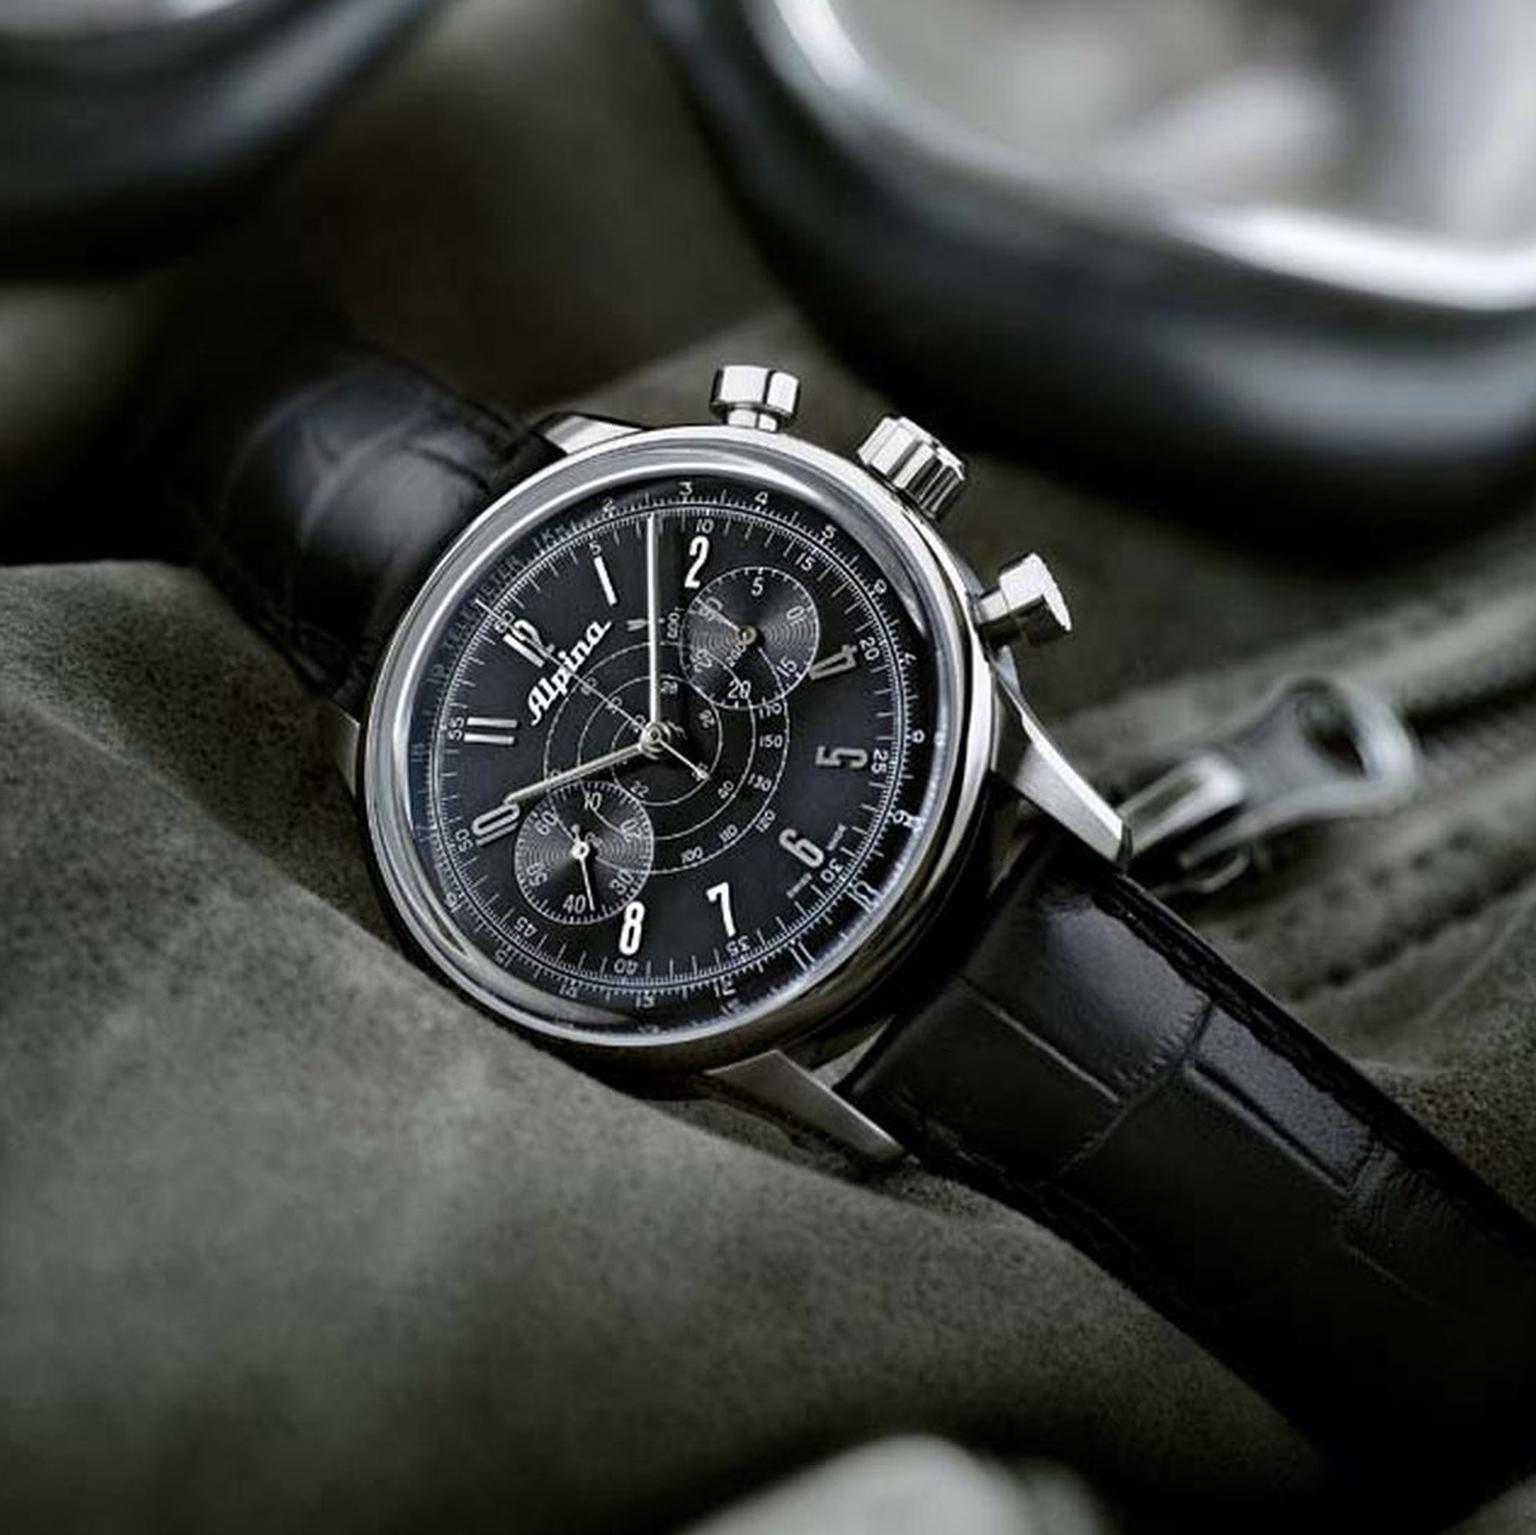 Powered by an Alpina calibre visible through the transparent caseback, the 41.5mm Alpina 130 Heritage Pilot Chronograph watch in stainless steel is also available with a black dial (£2,100).